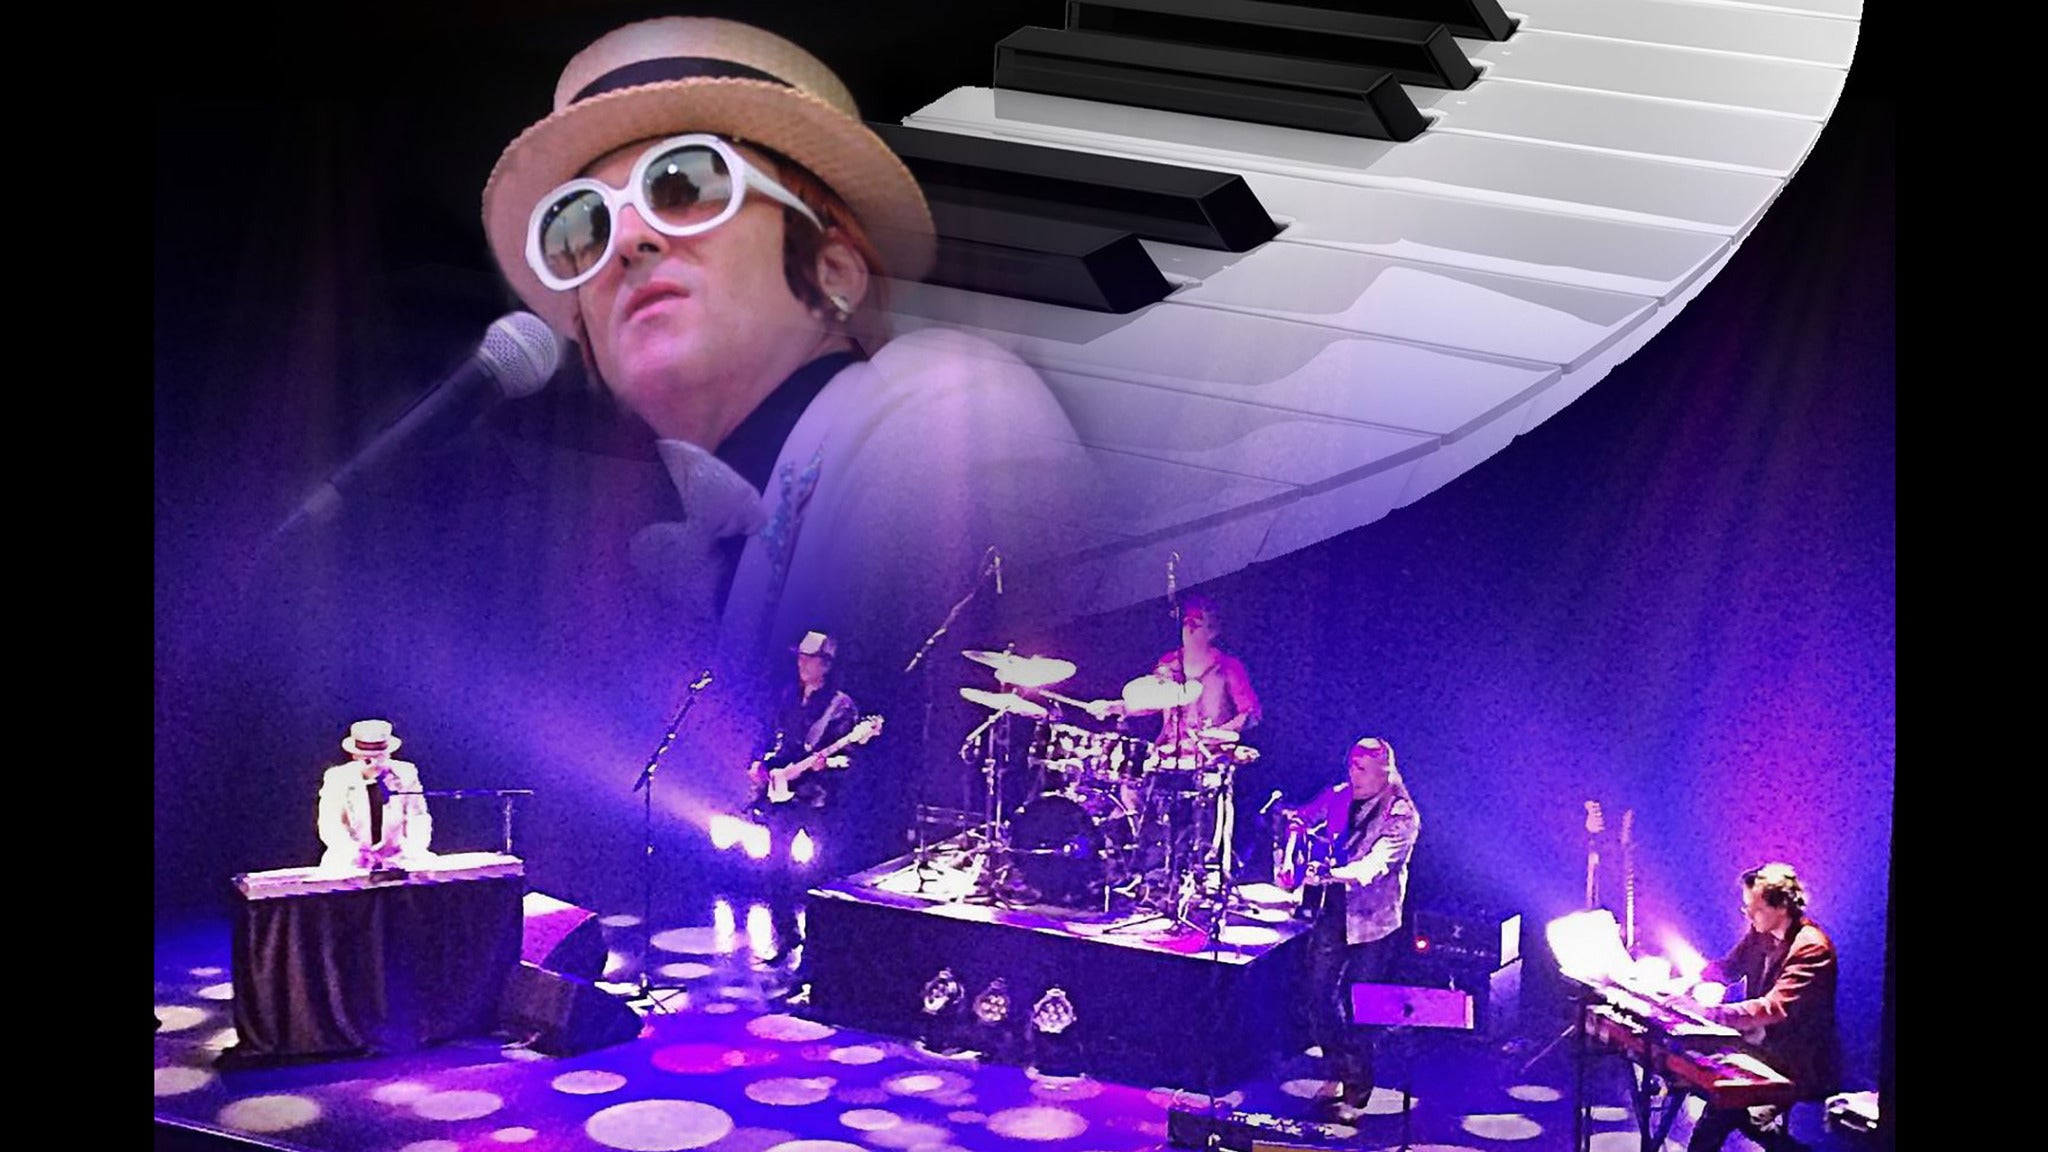 Image used with permission from Ticketmaster | Hommage Elton John - Elton Songs tickets